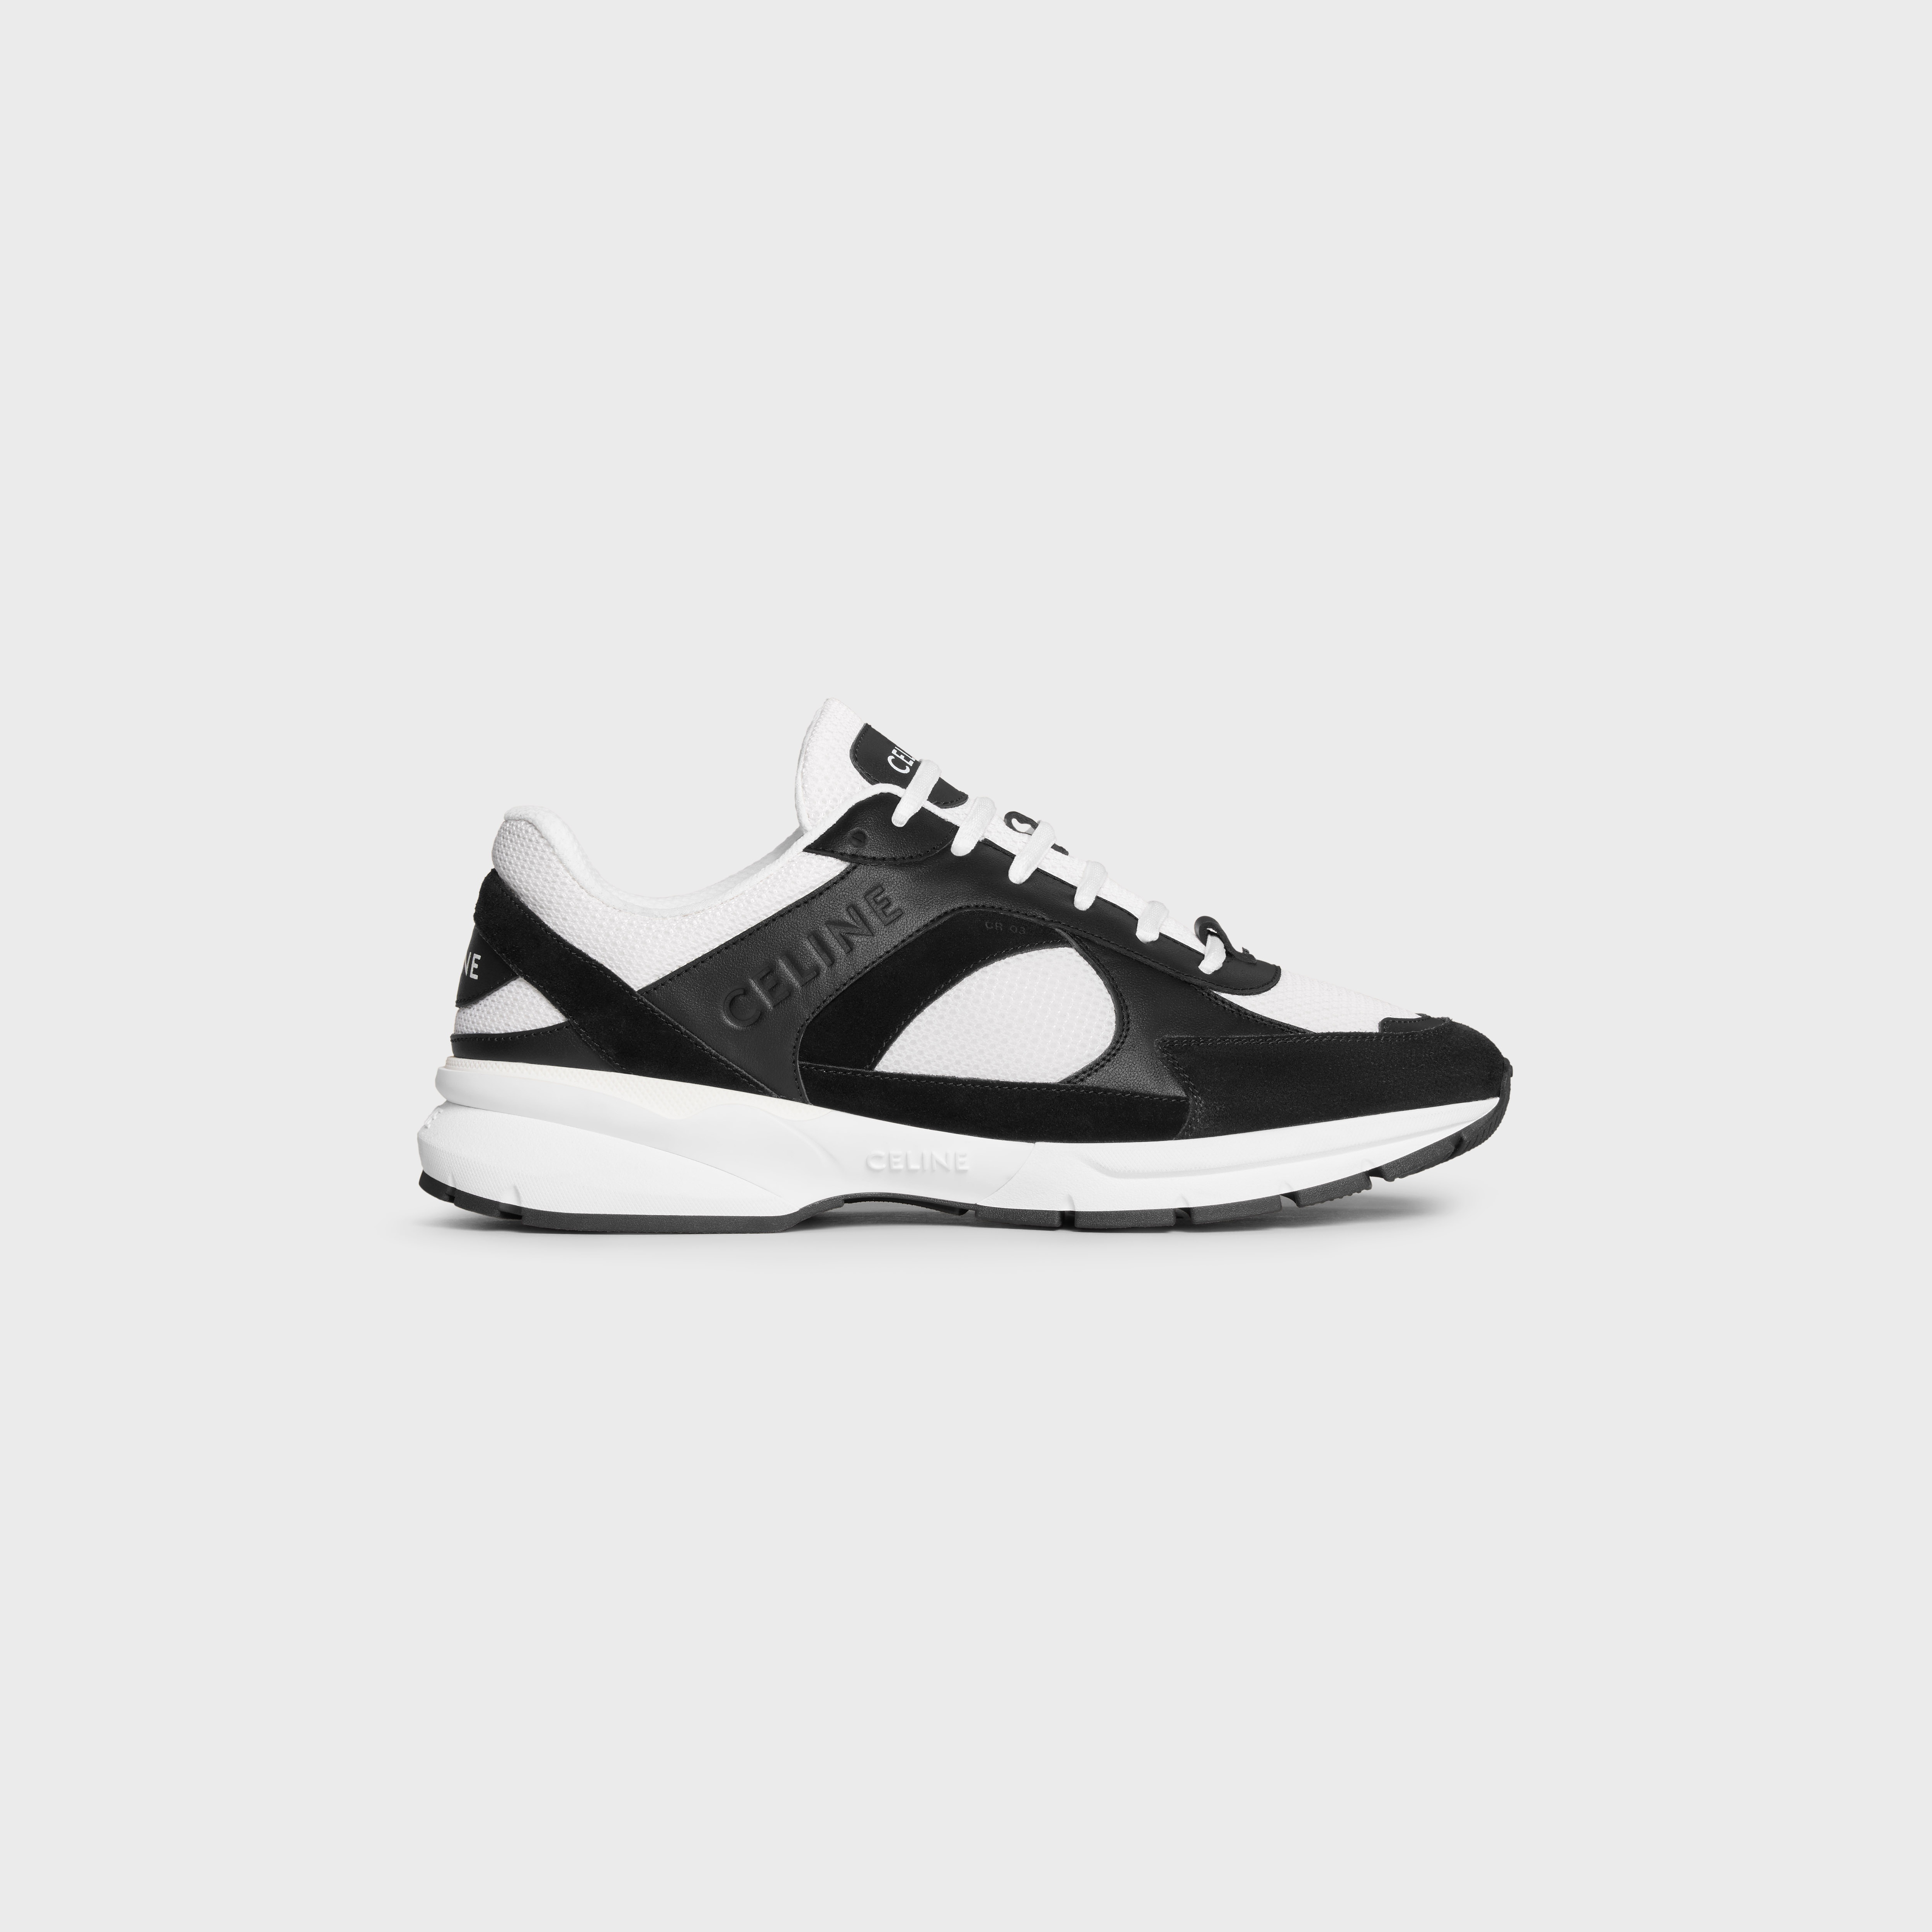 CELINE RUNNER CR-03 LOW LACE-UP SNEAKER in MESH, CALFSKIN AND SUEDE CALFSKIN - 1